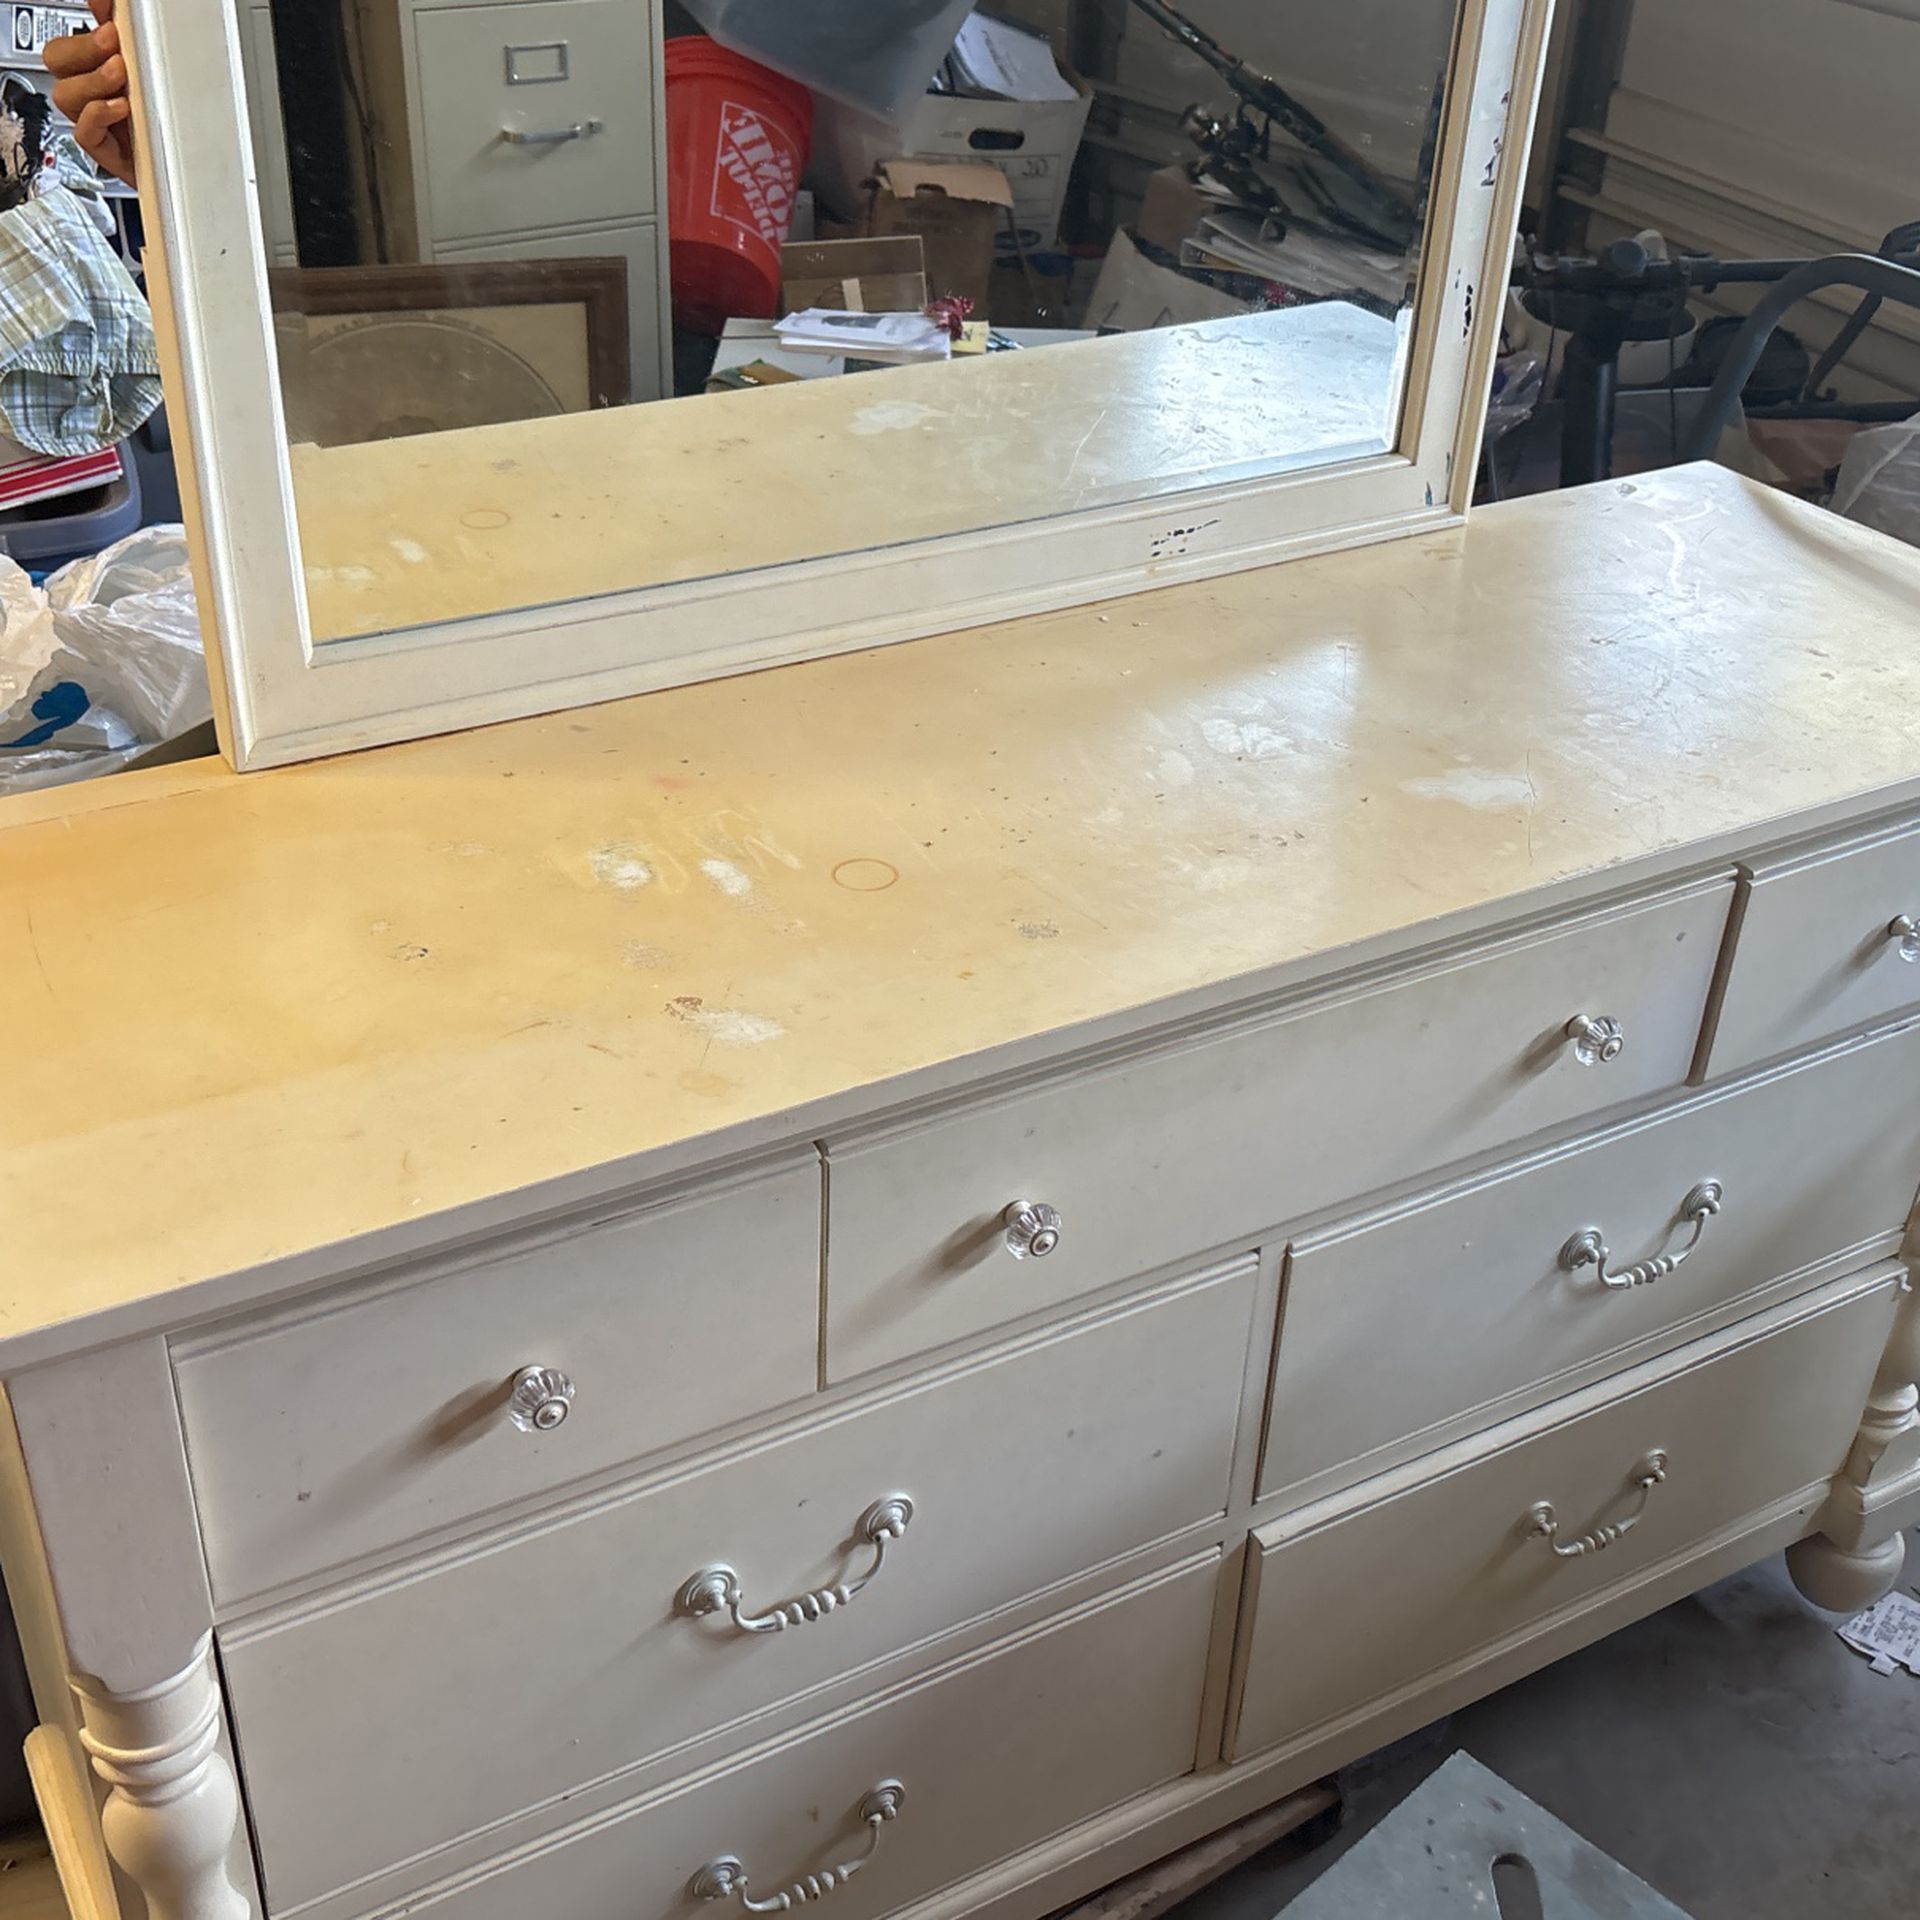 Trundle Bed Frame (disassembled) And Matching Dresser With Mirror